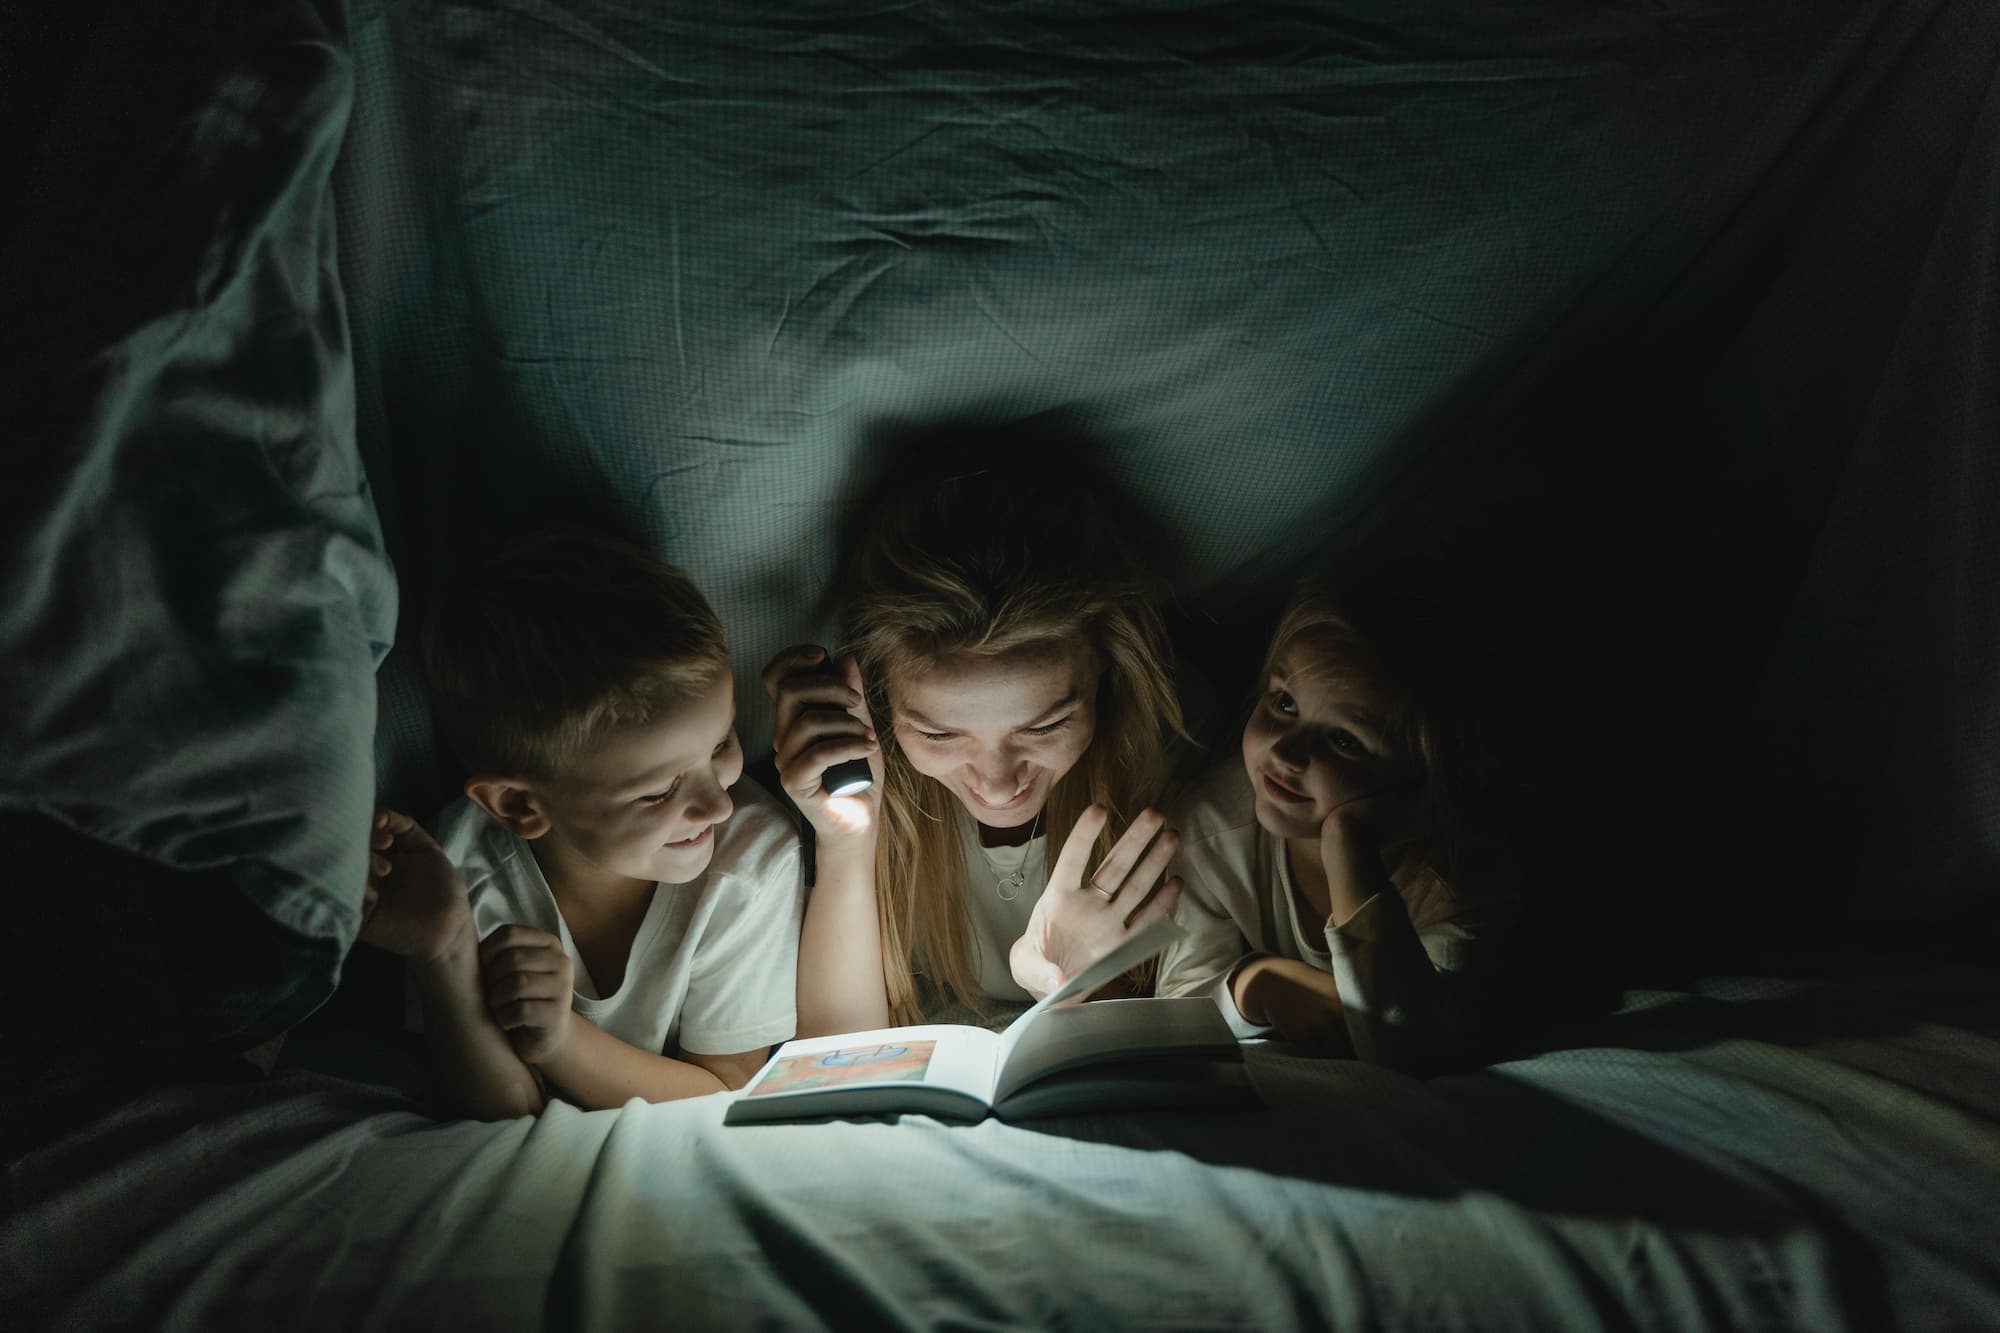 Mom reading a book with her kids under the covers, safe from bed bugs and other pests that cause health risk